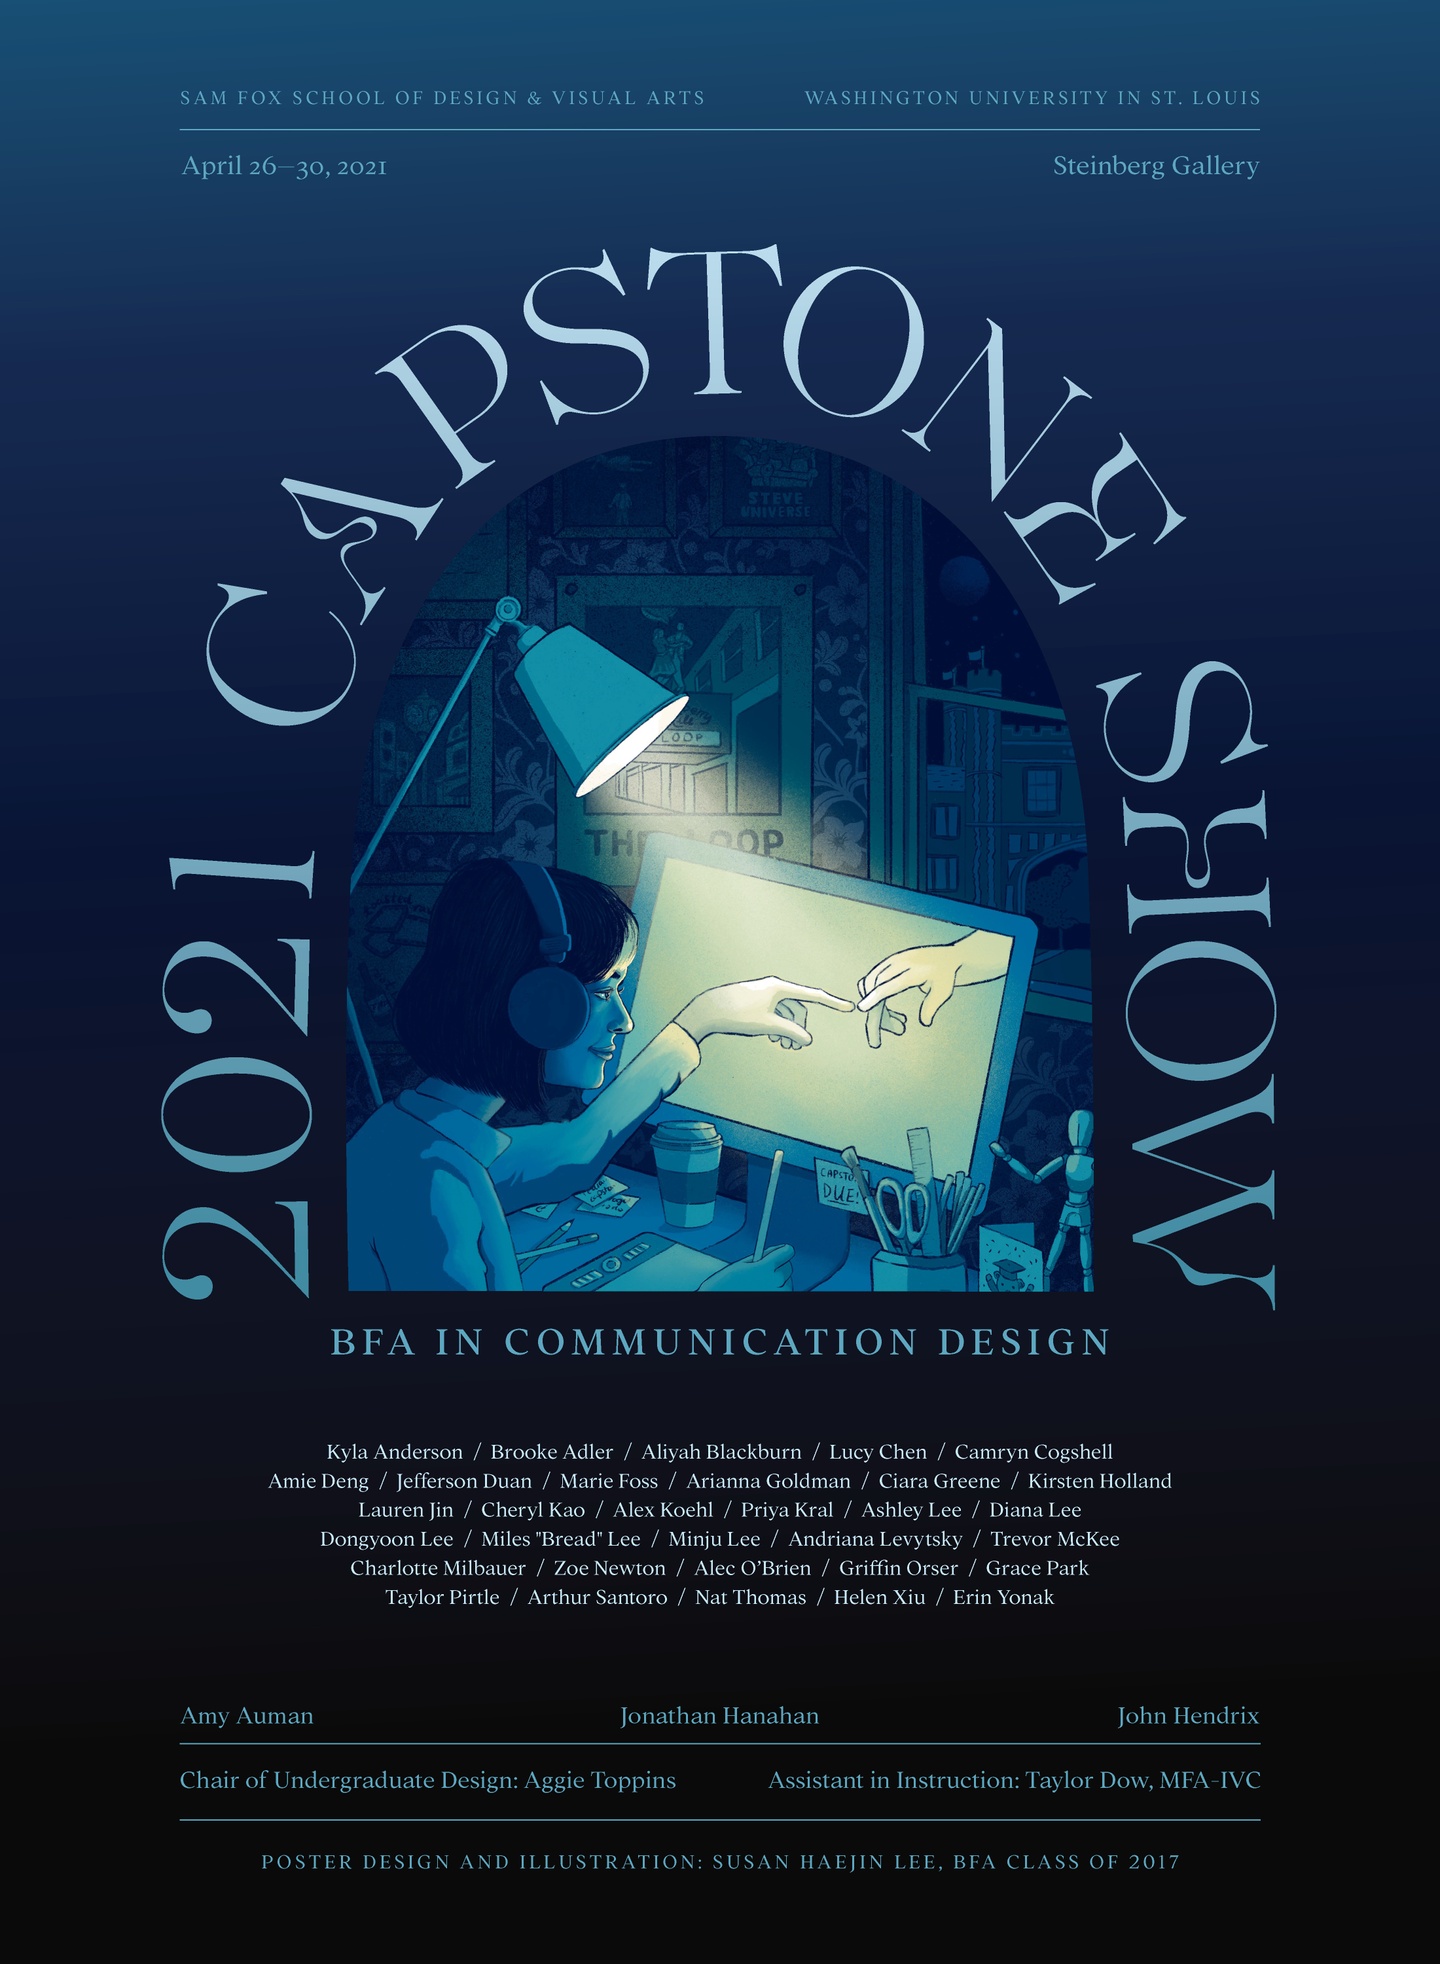 Dark blue poster design reading "2021 Capstone Show" with a vignette illustration of a person working at night at a computer, reaching through the computer screen to touch another person's hand.